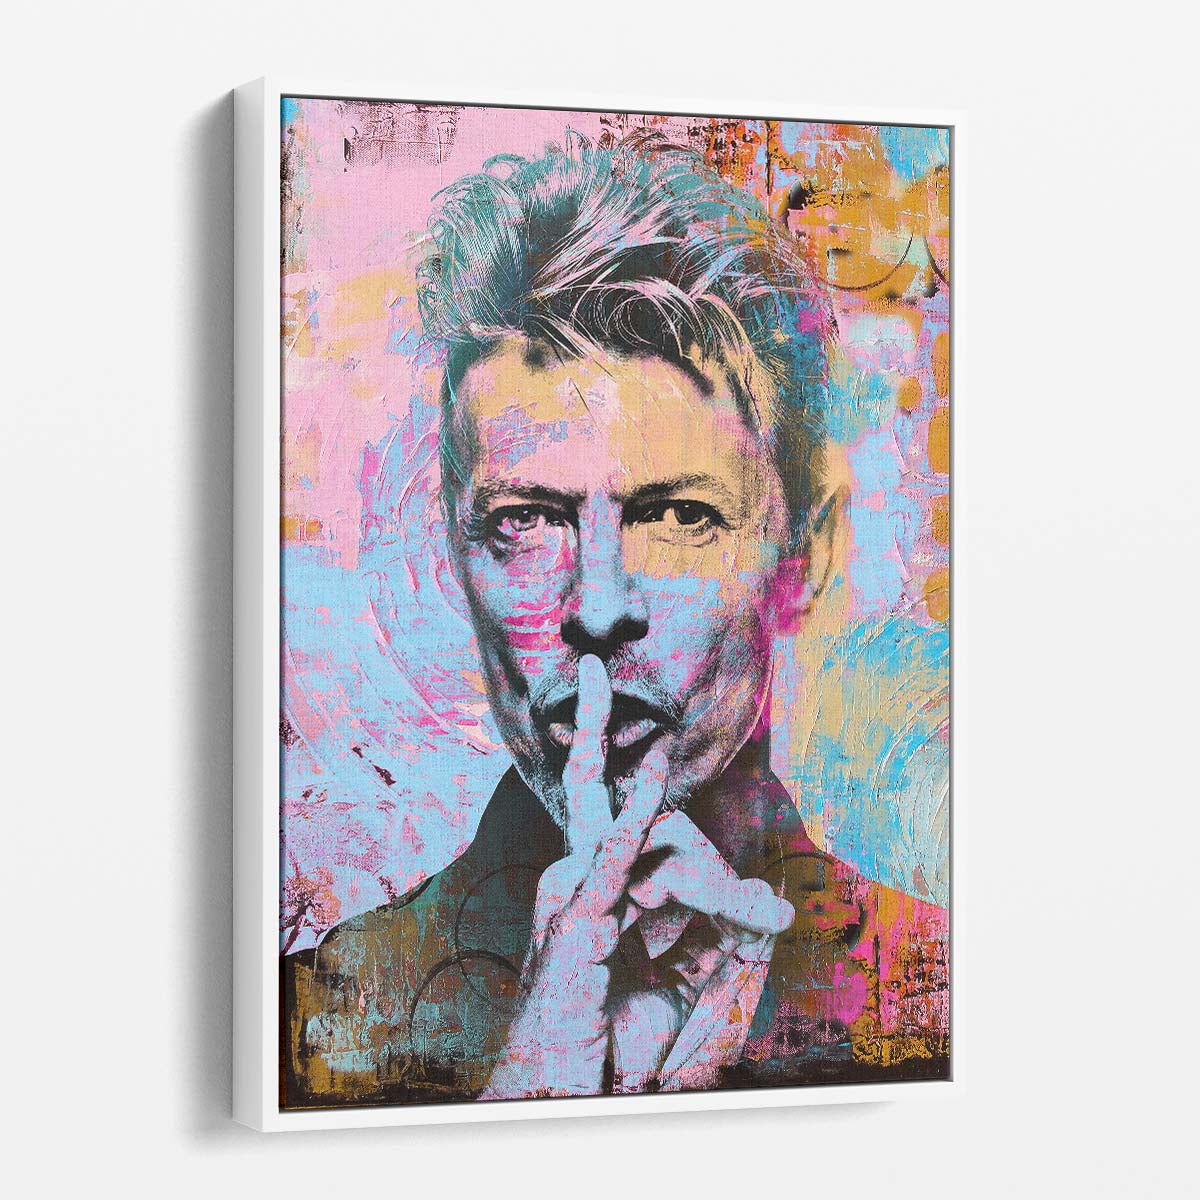 David Bowie Circles Graffiti Wall Art by Luxuriance Designs. Made in USA.